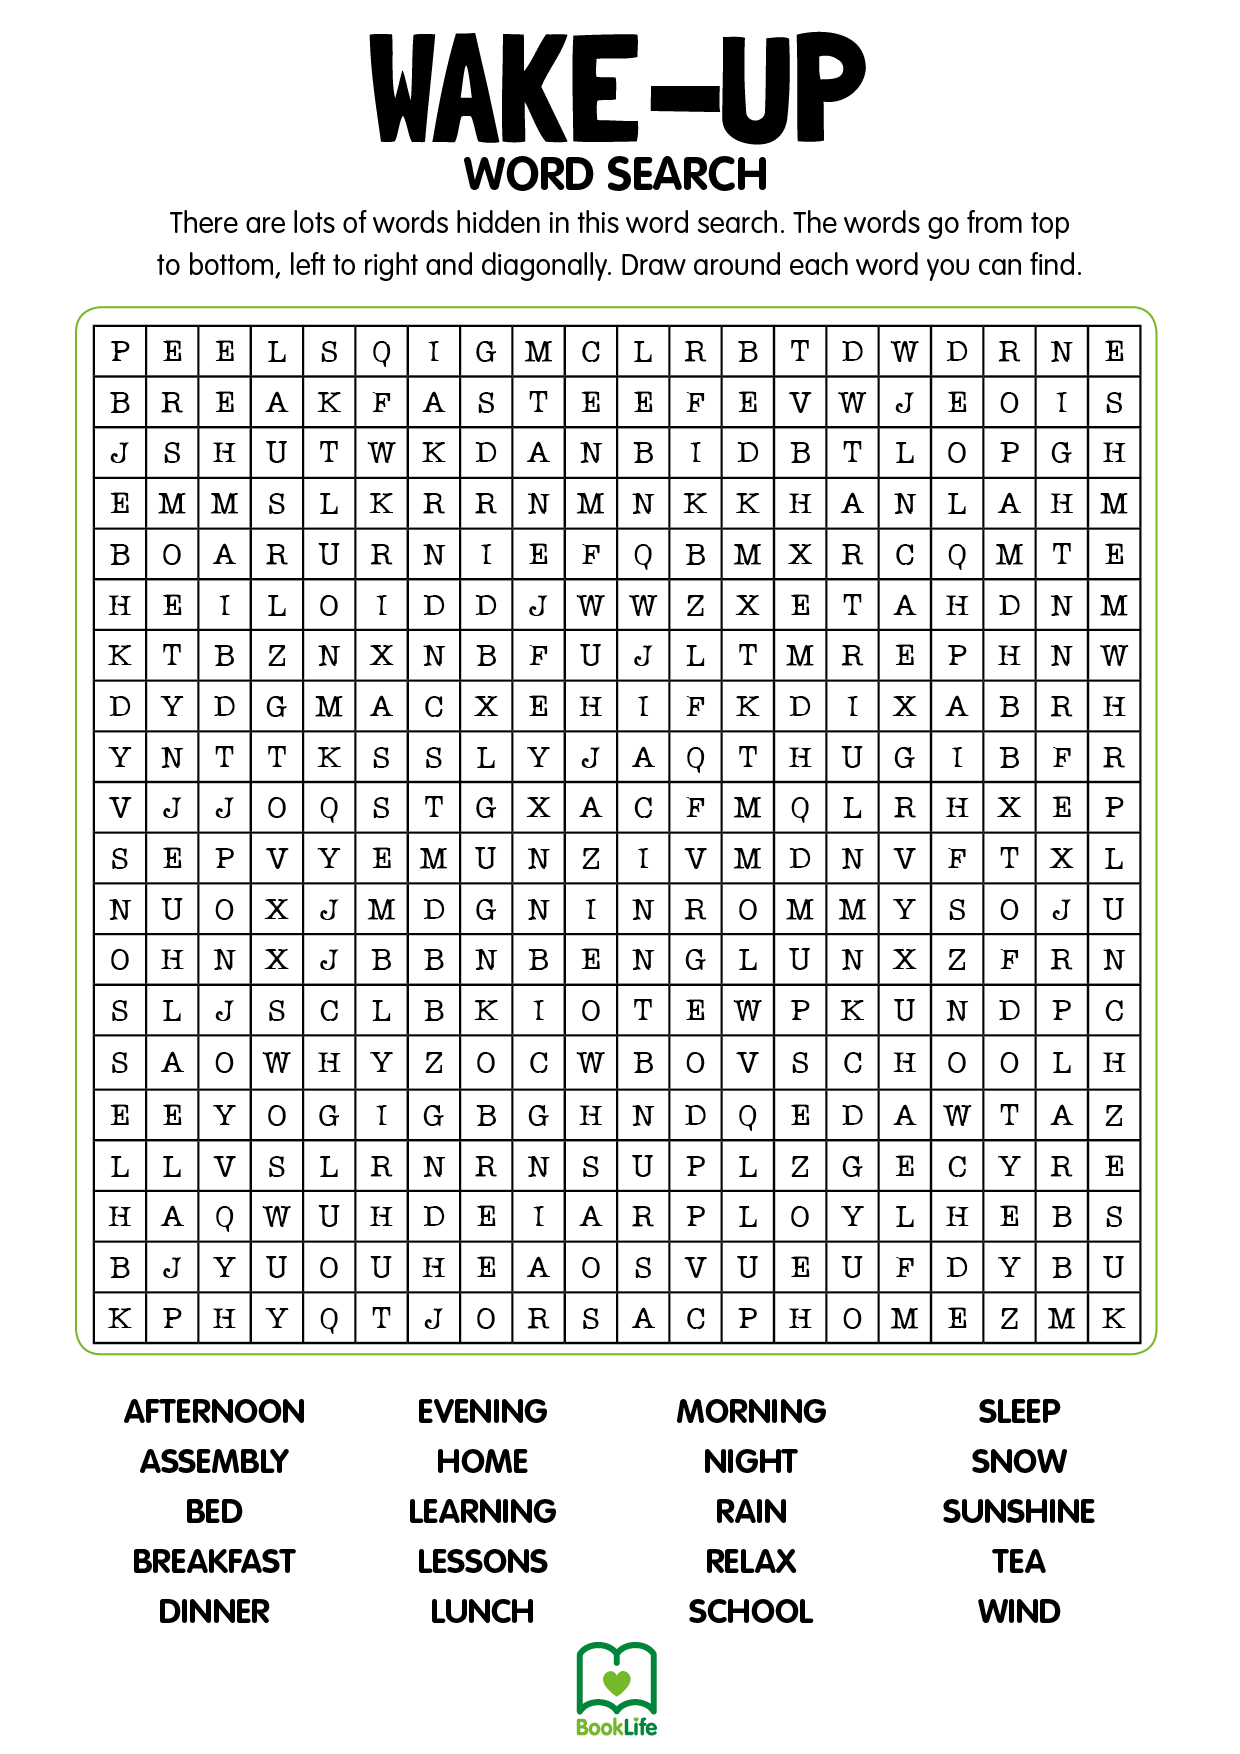 Free Wake-Up Word Search by BookLife